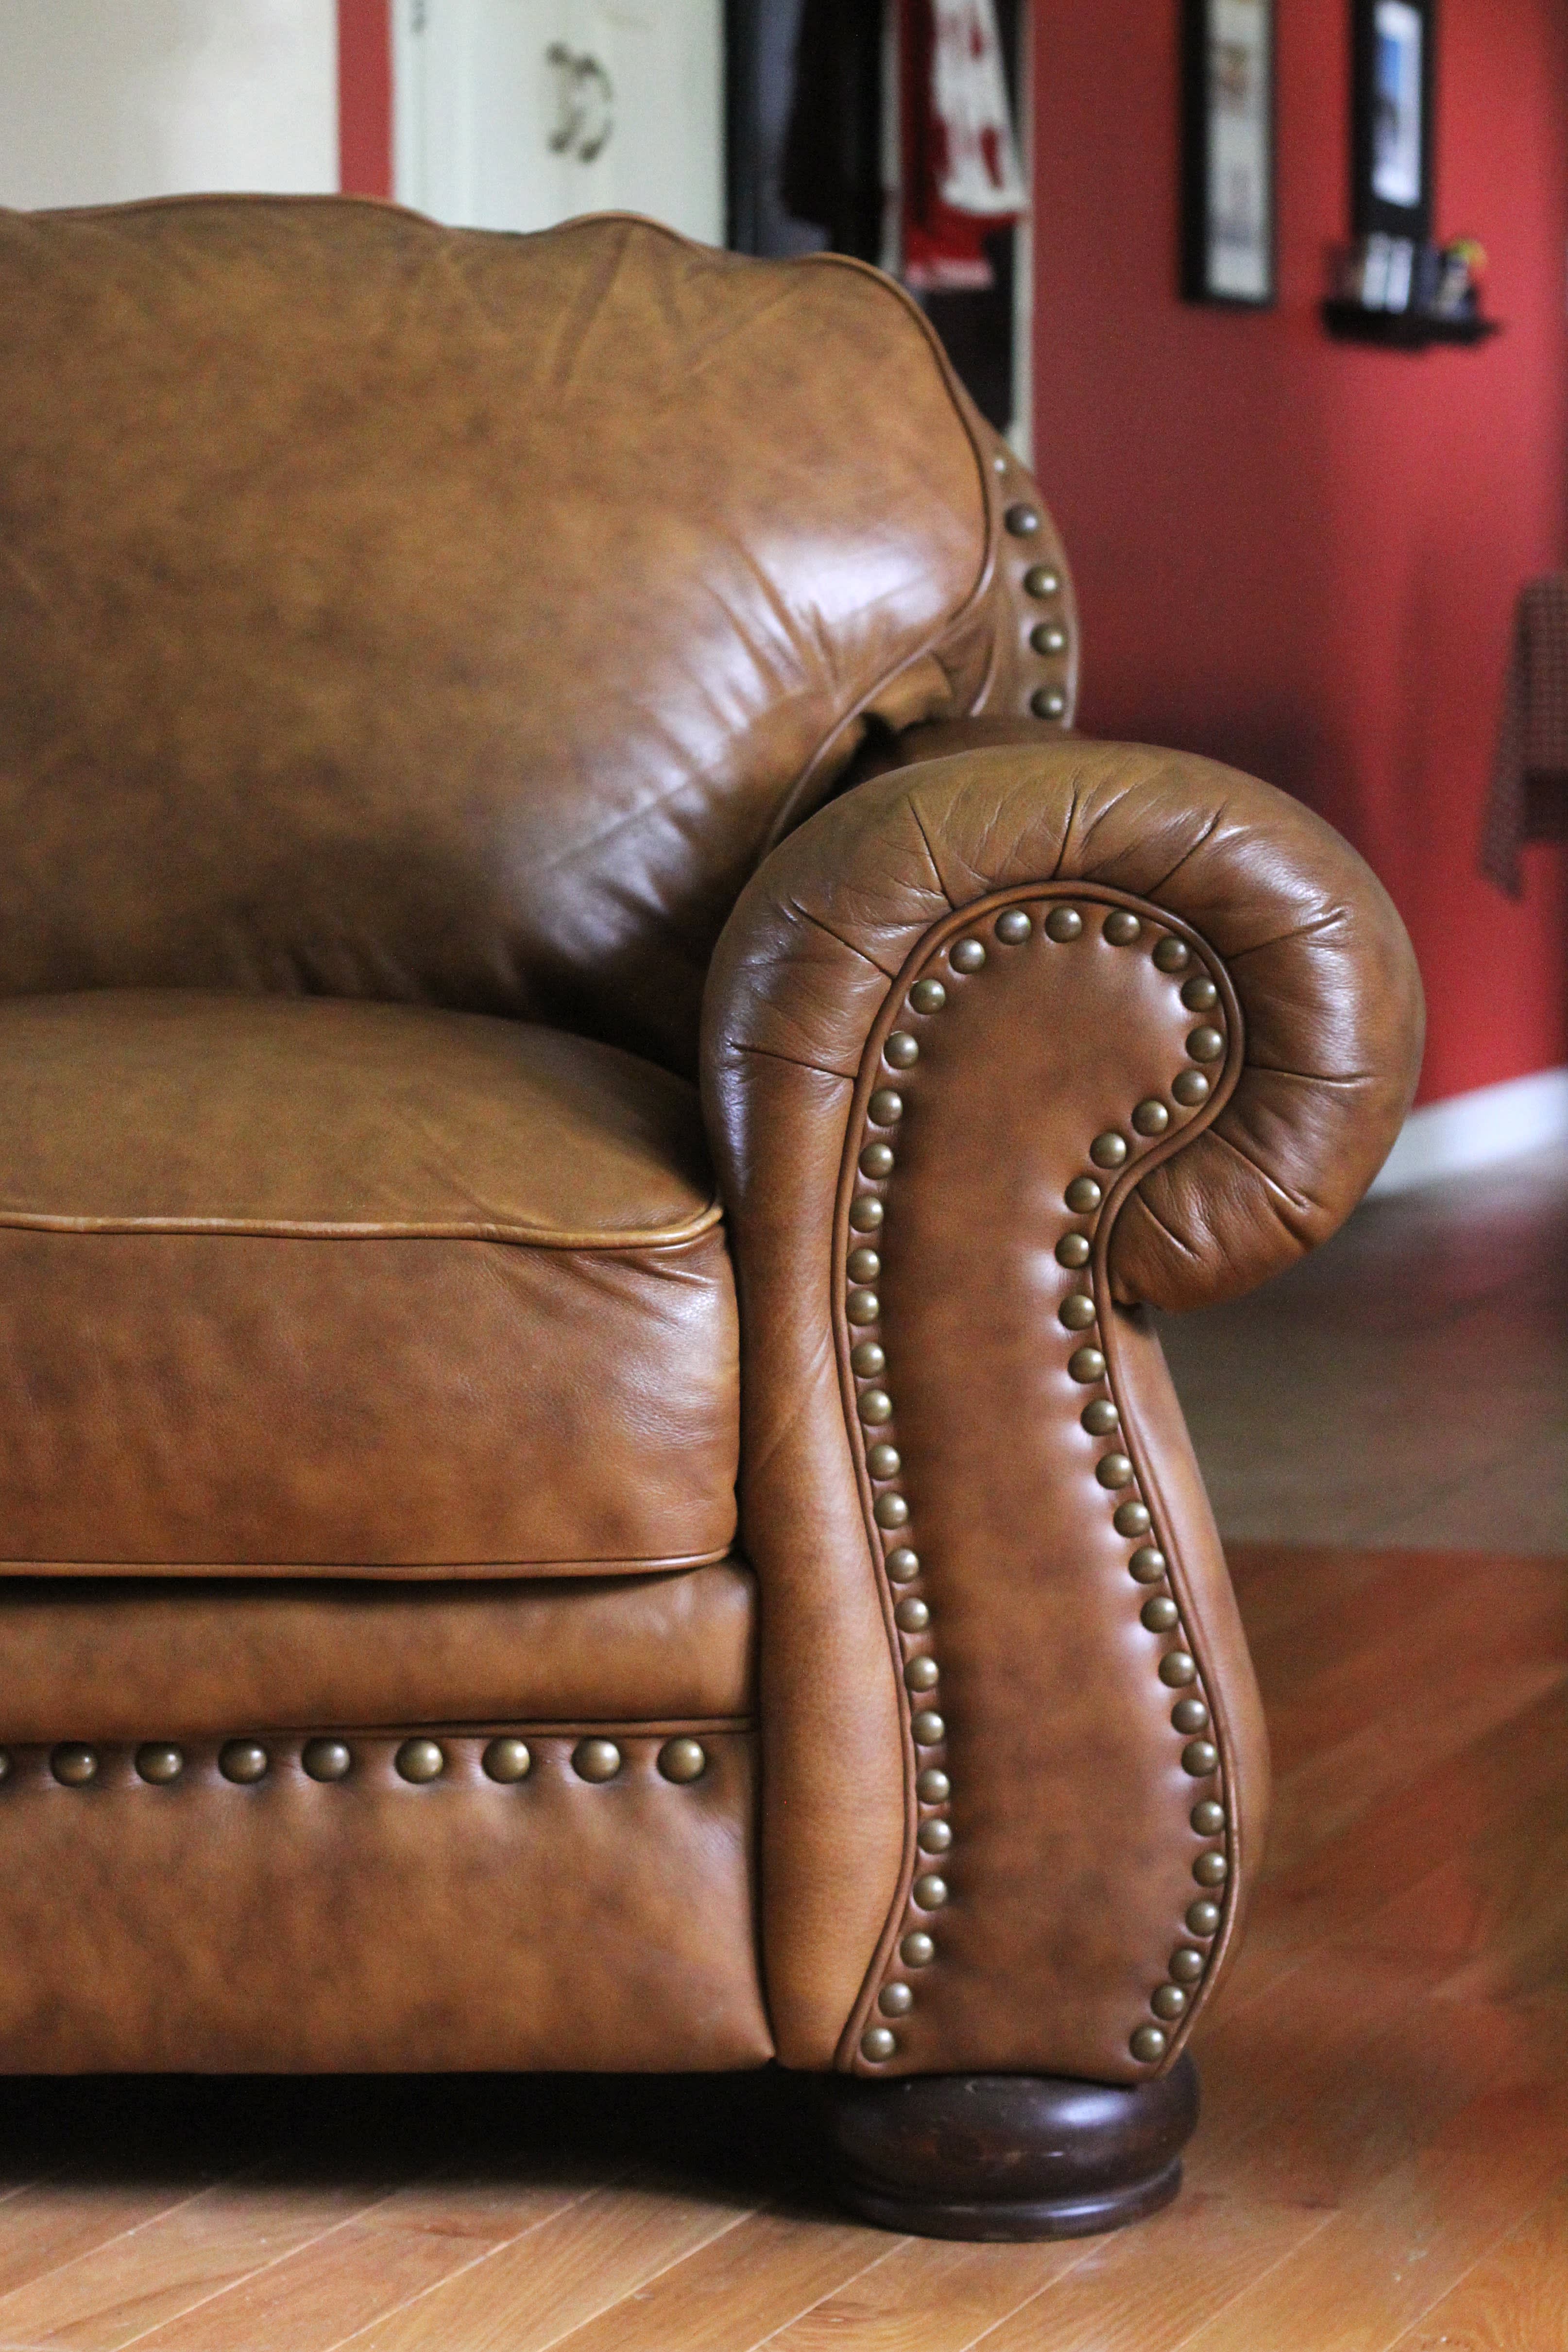 How to Stuff Saggy Couch Cushions: Under $50 - thetarnishedjewelblog